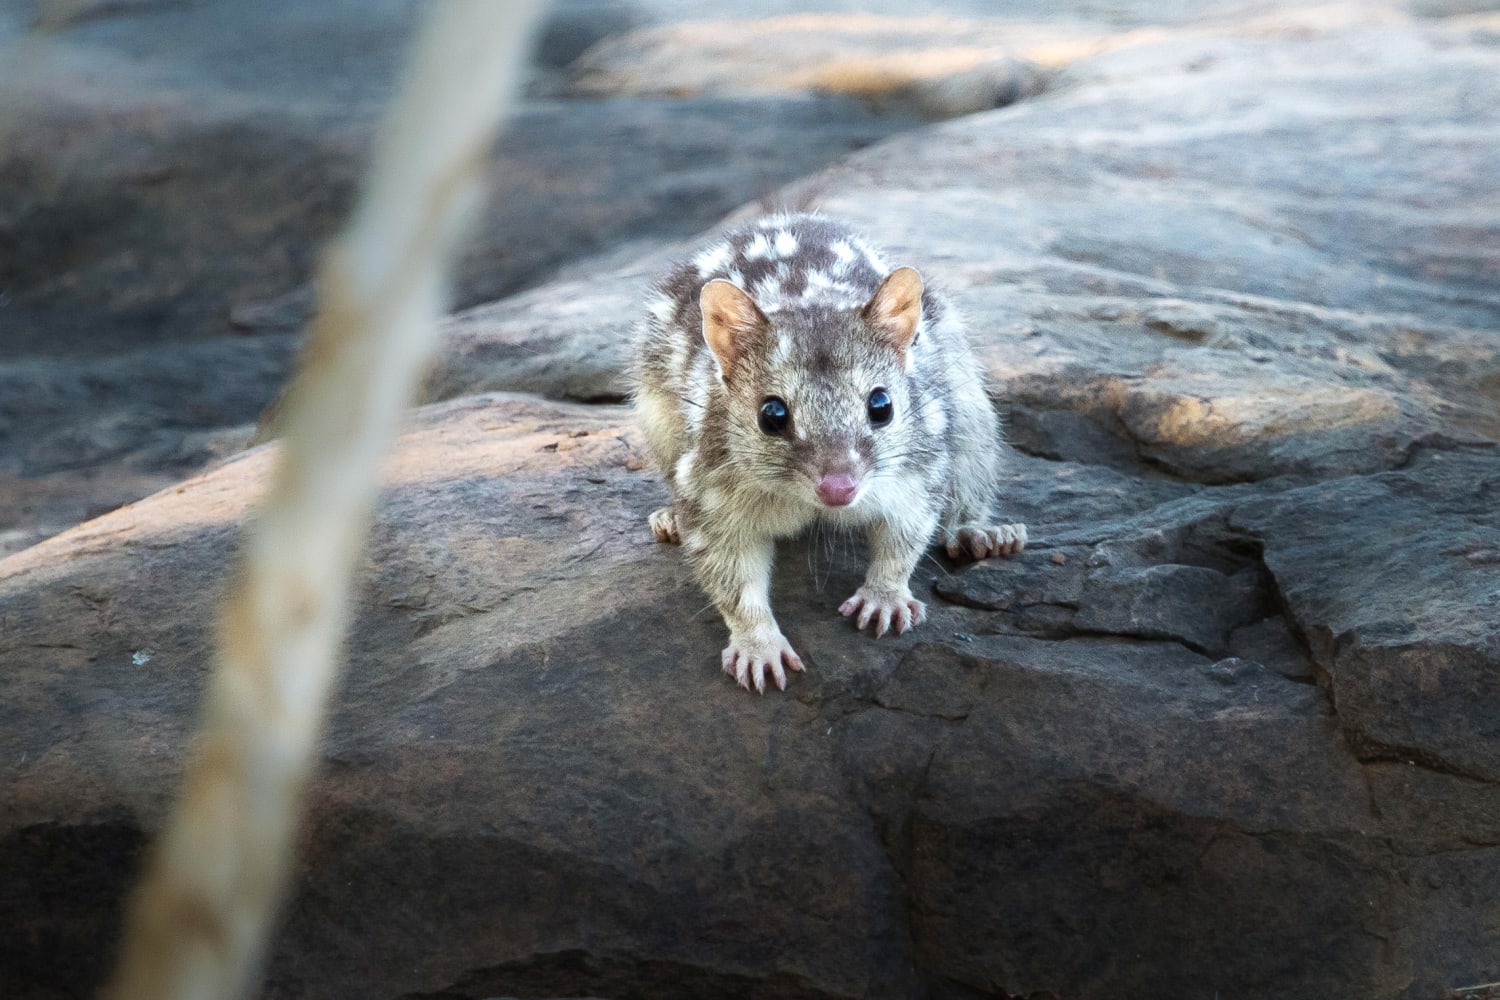 Sex and no sleep may be killing endangered quolls, new study finds